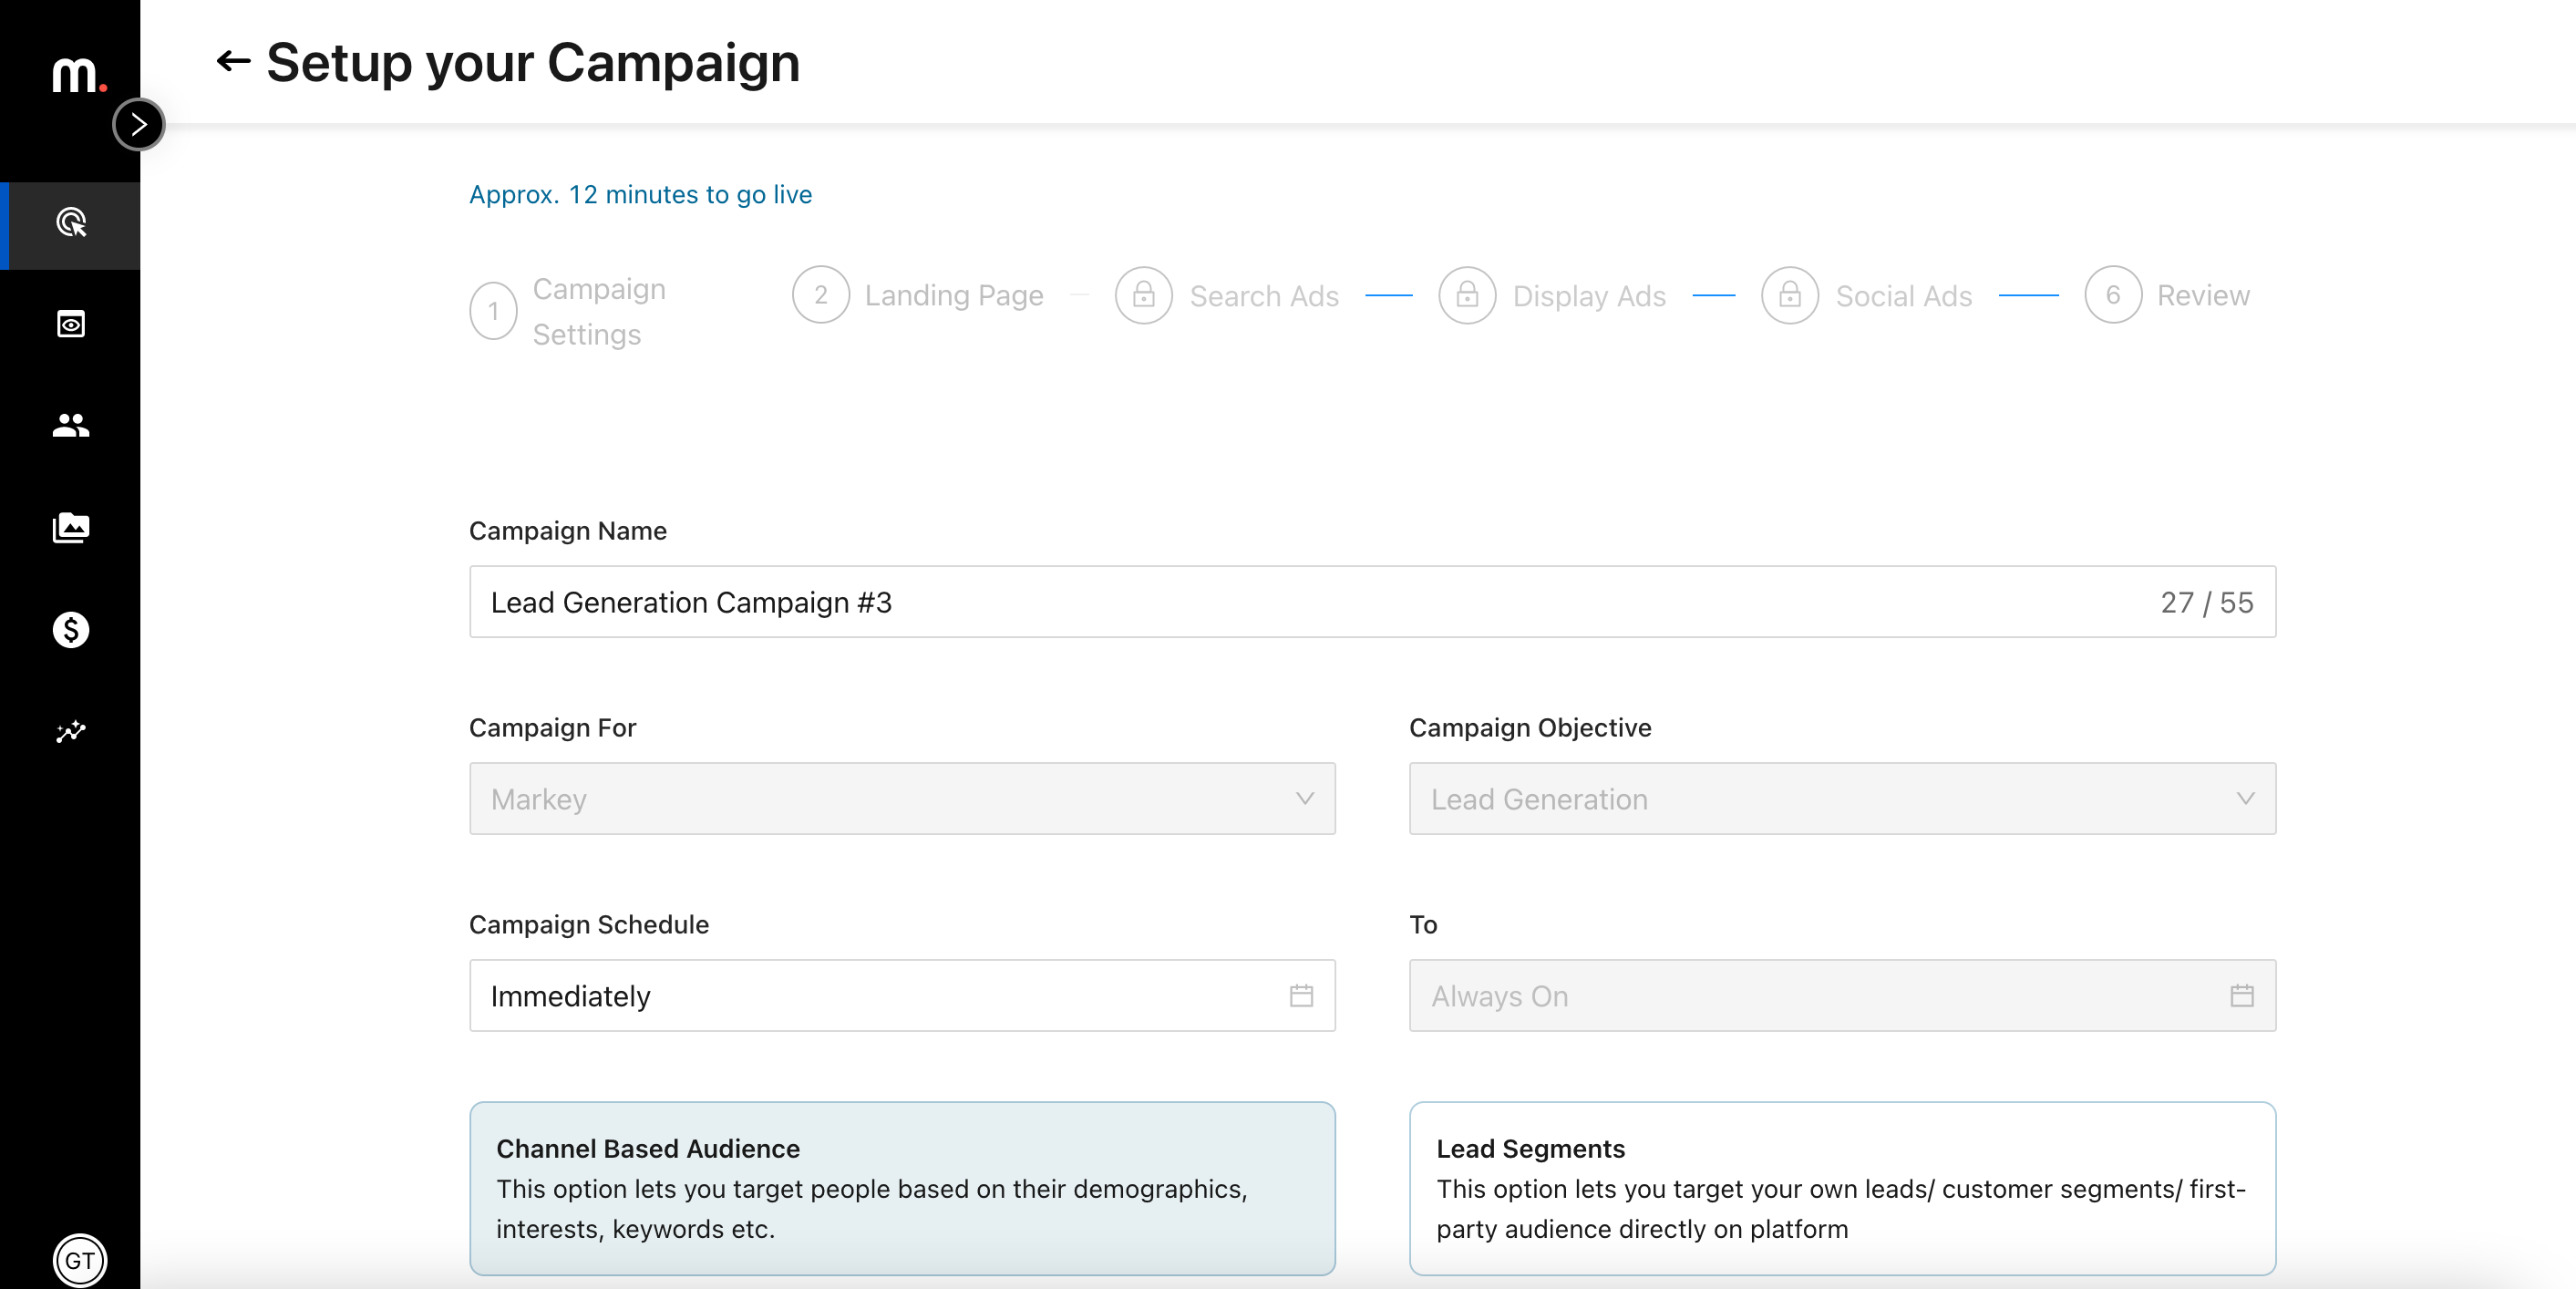 Launch Your Campaign in minutes